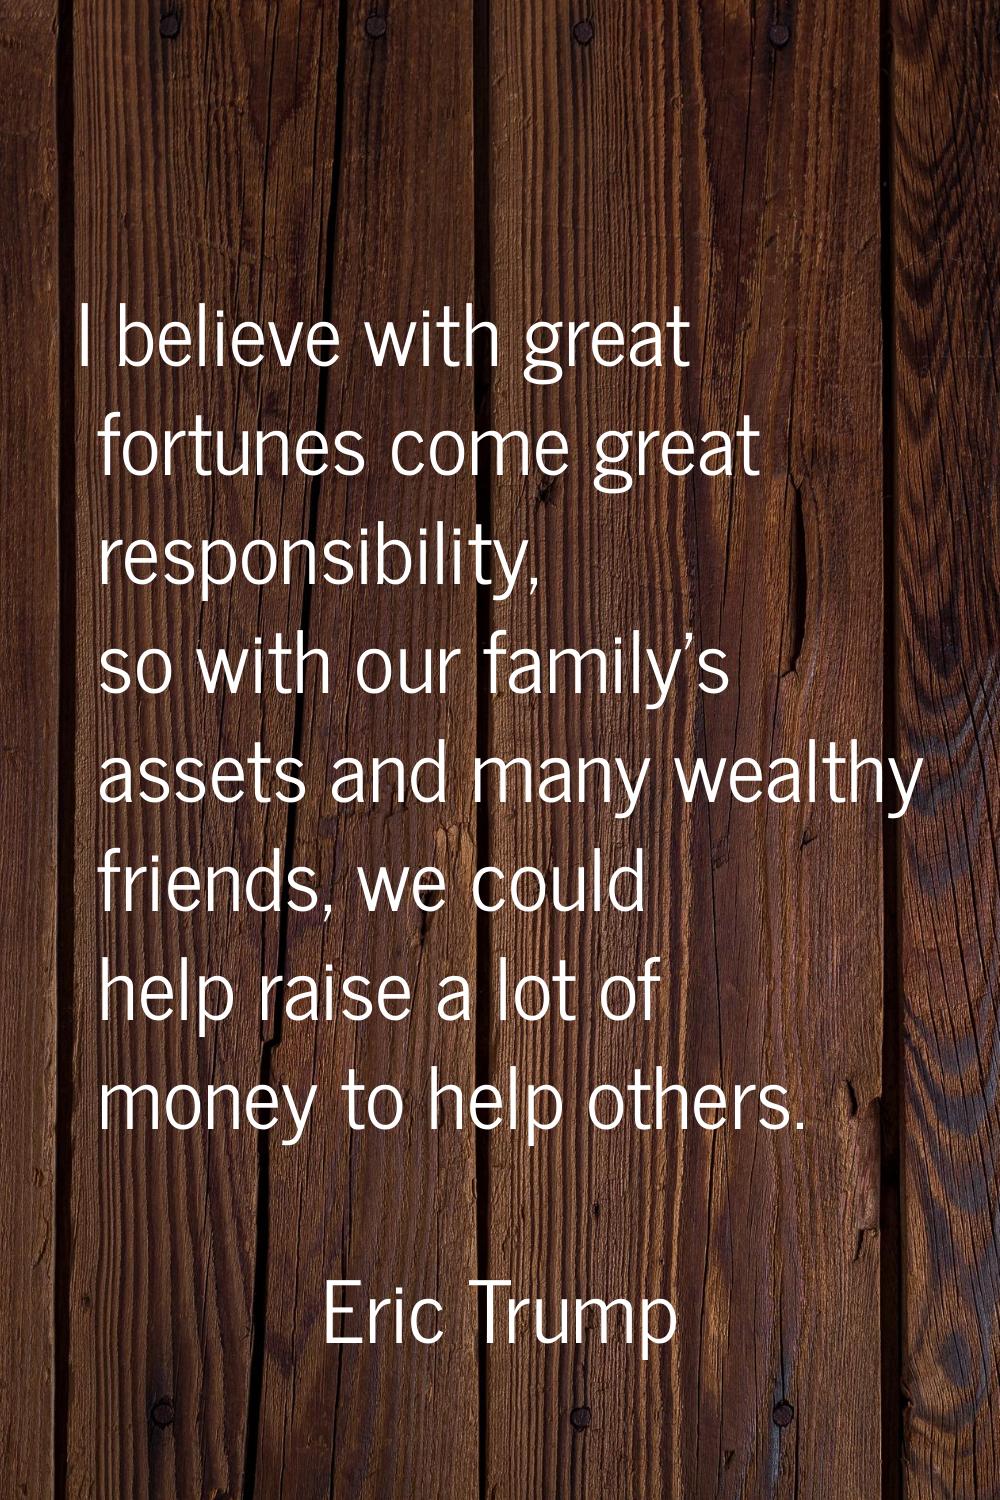 I believe with great fortunes come great responsibility, so with our family's assets and many wealt